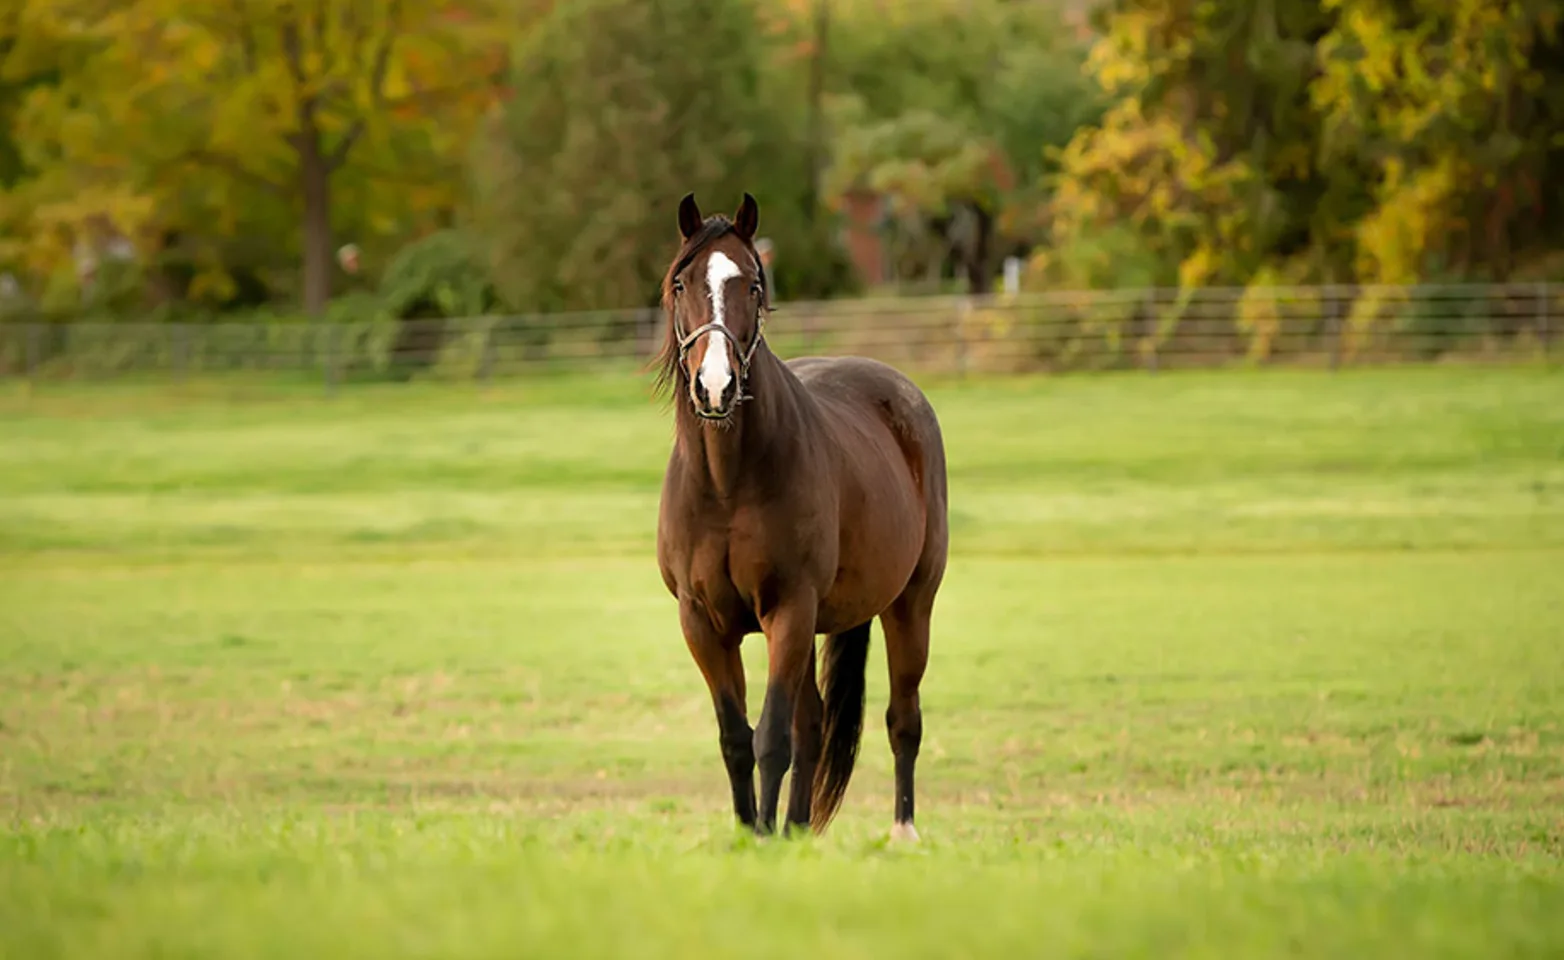 Brown horse standing in a grassy field looking towards the camera from a distance